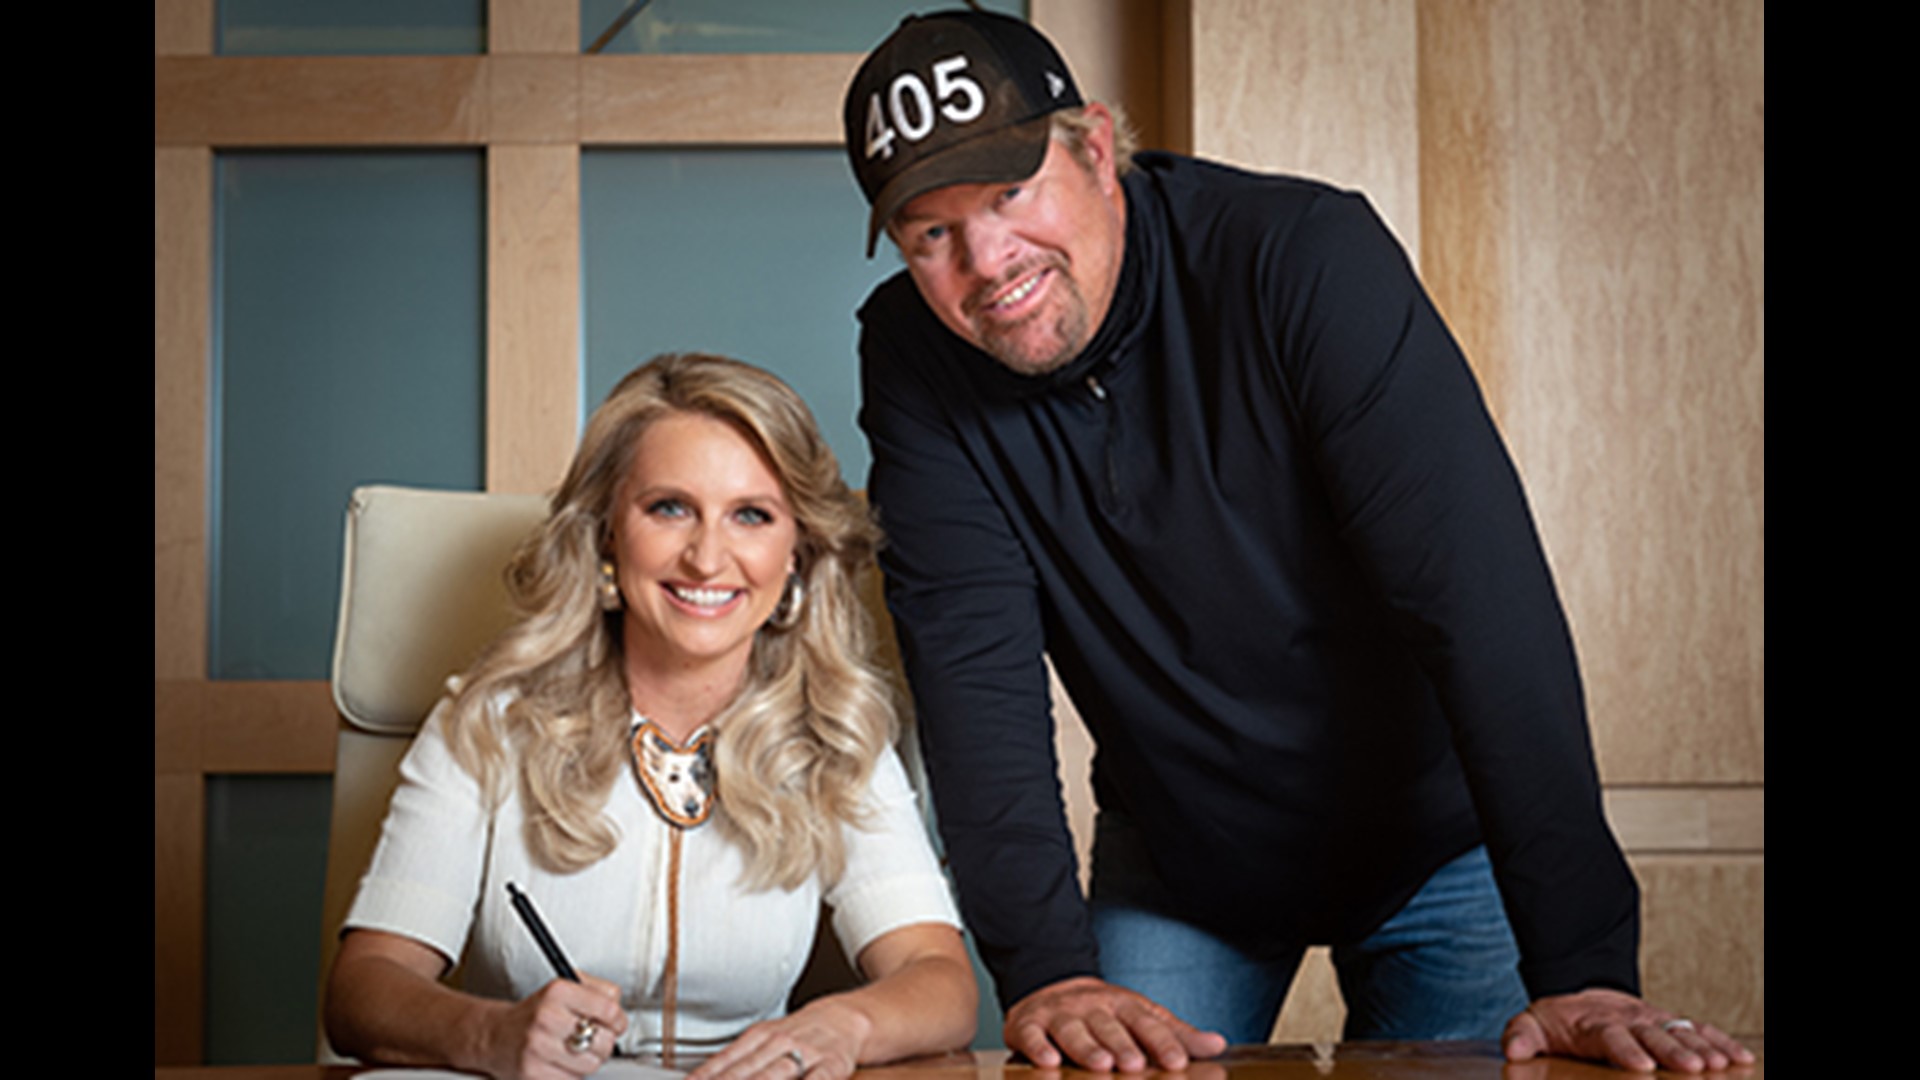 Kimberly Kelly has gone from playing spots like Papa Joe's and Backyard Bar and Grill to signing a deal with Toby Keith's music label.